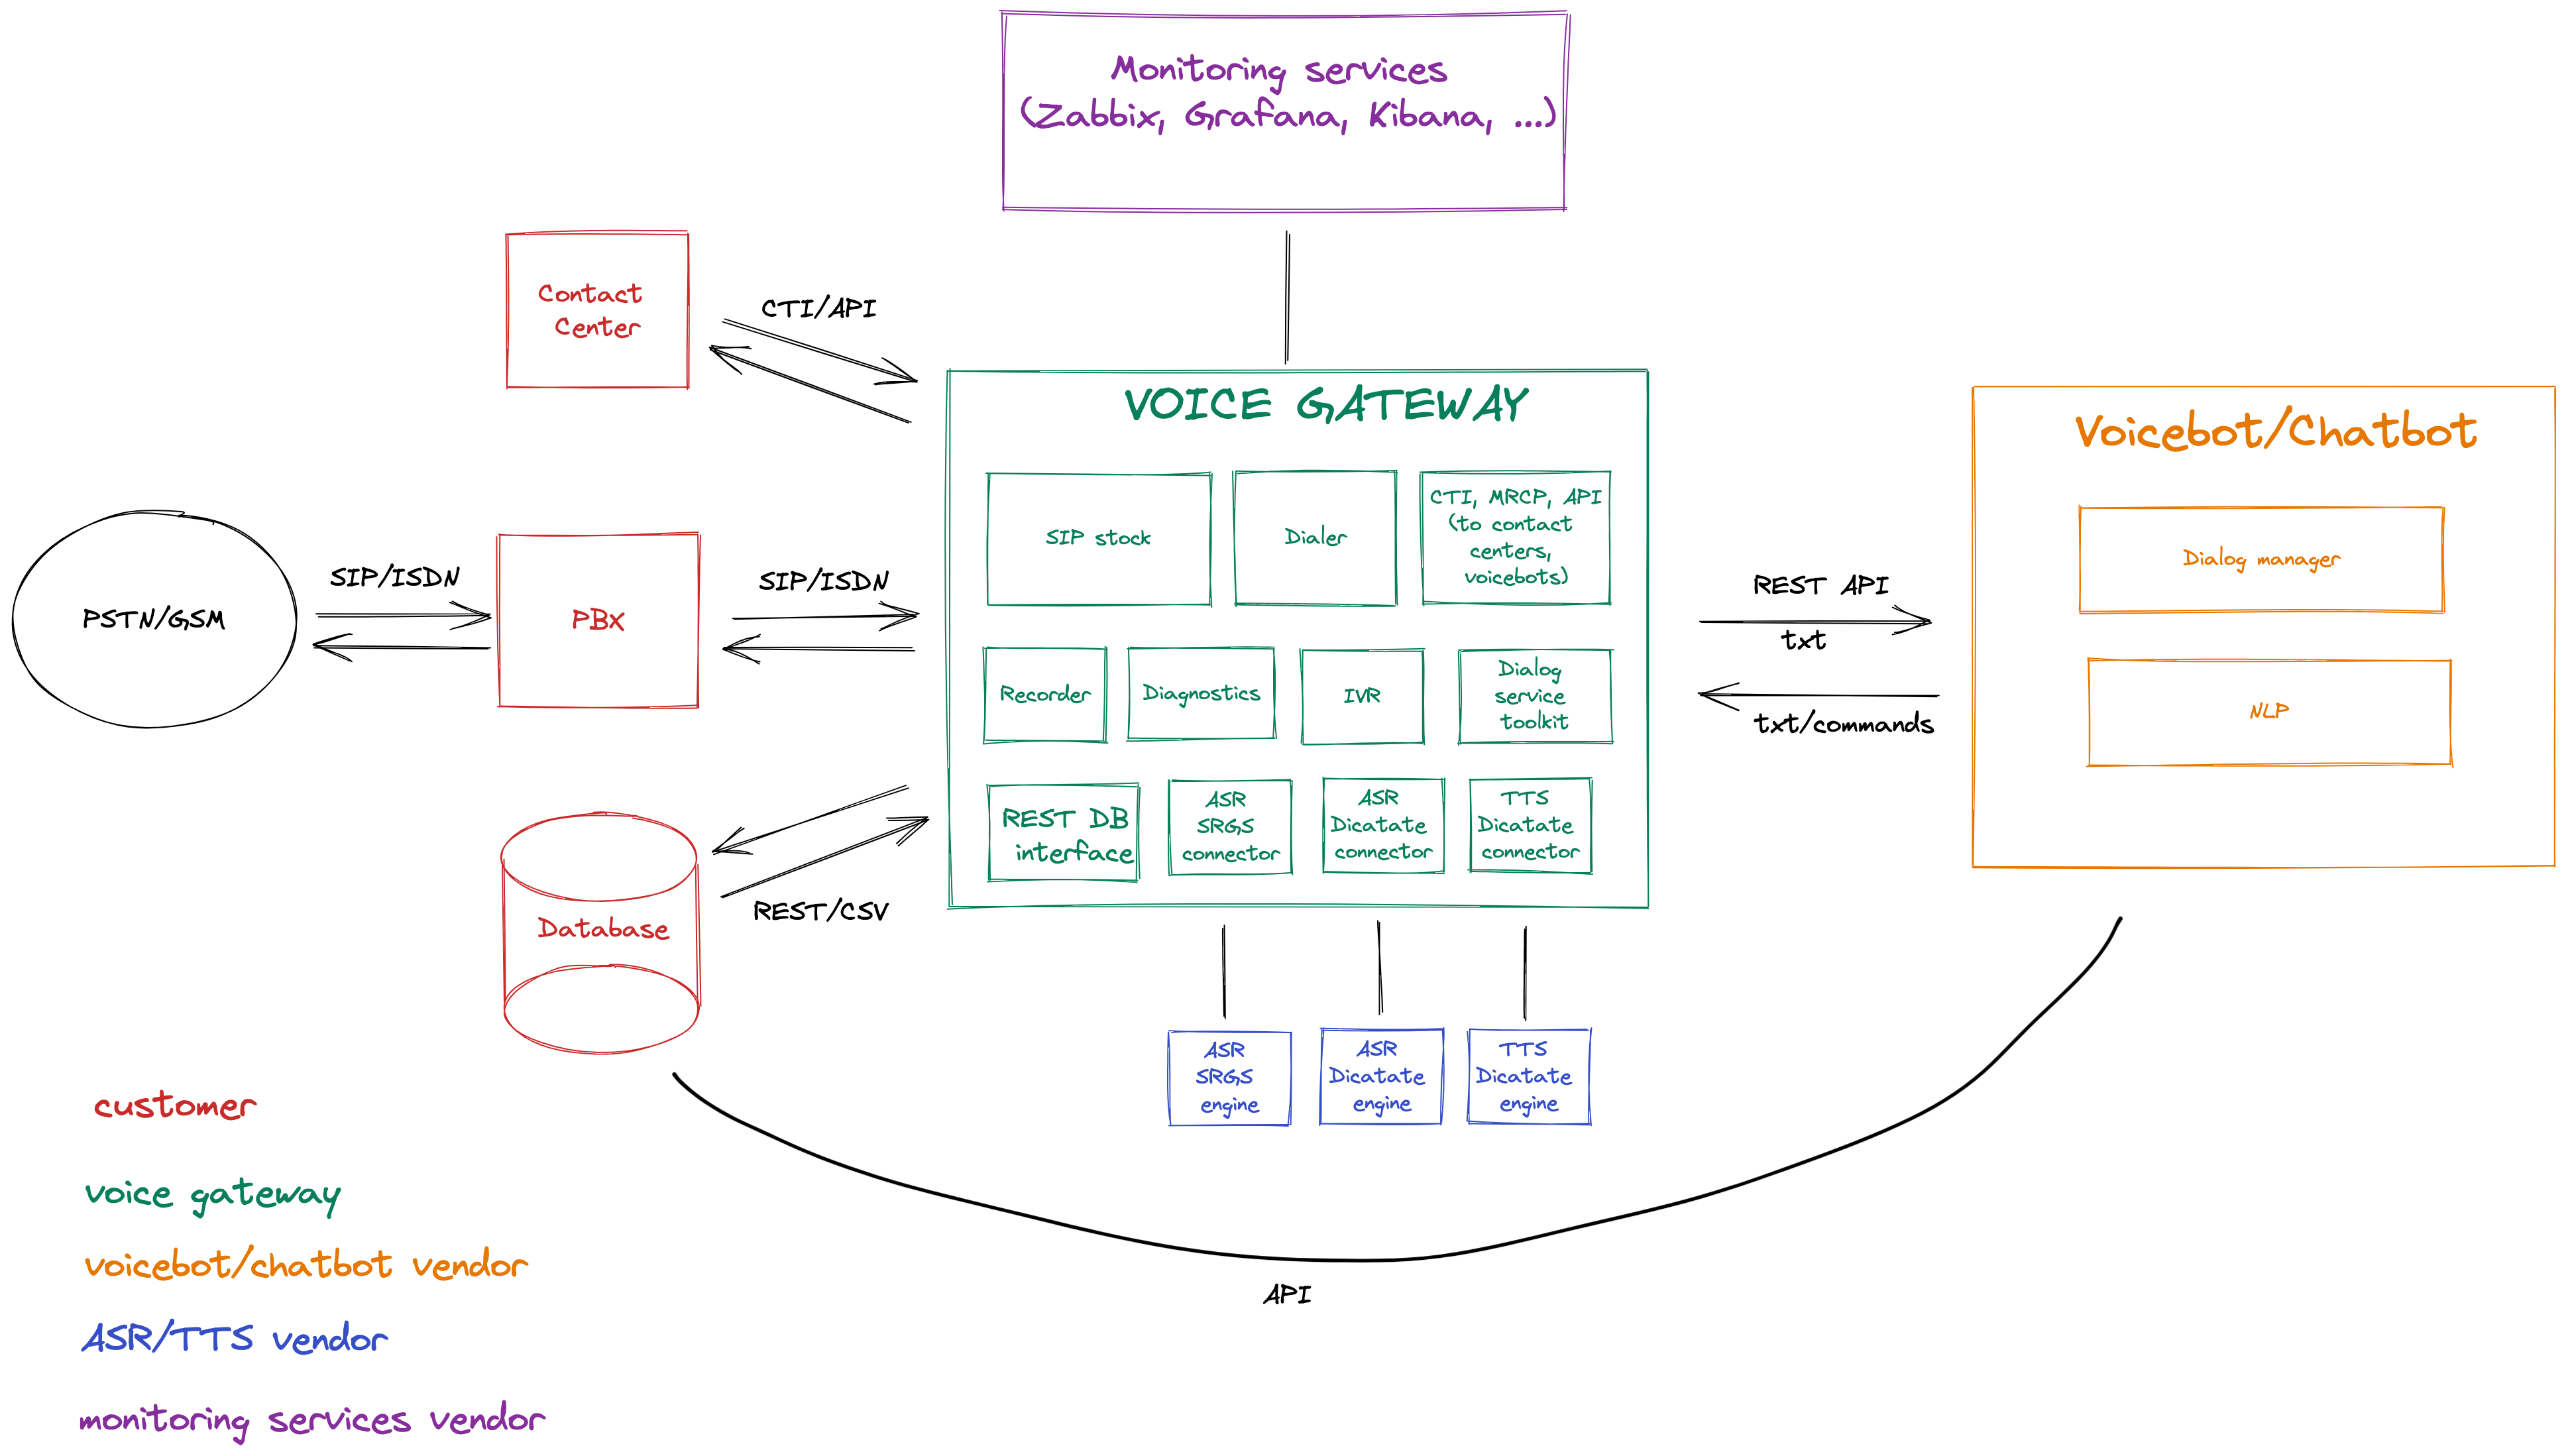 Figure 2. Logical diagram of the Voice Gateway system